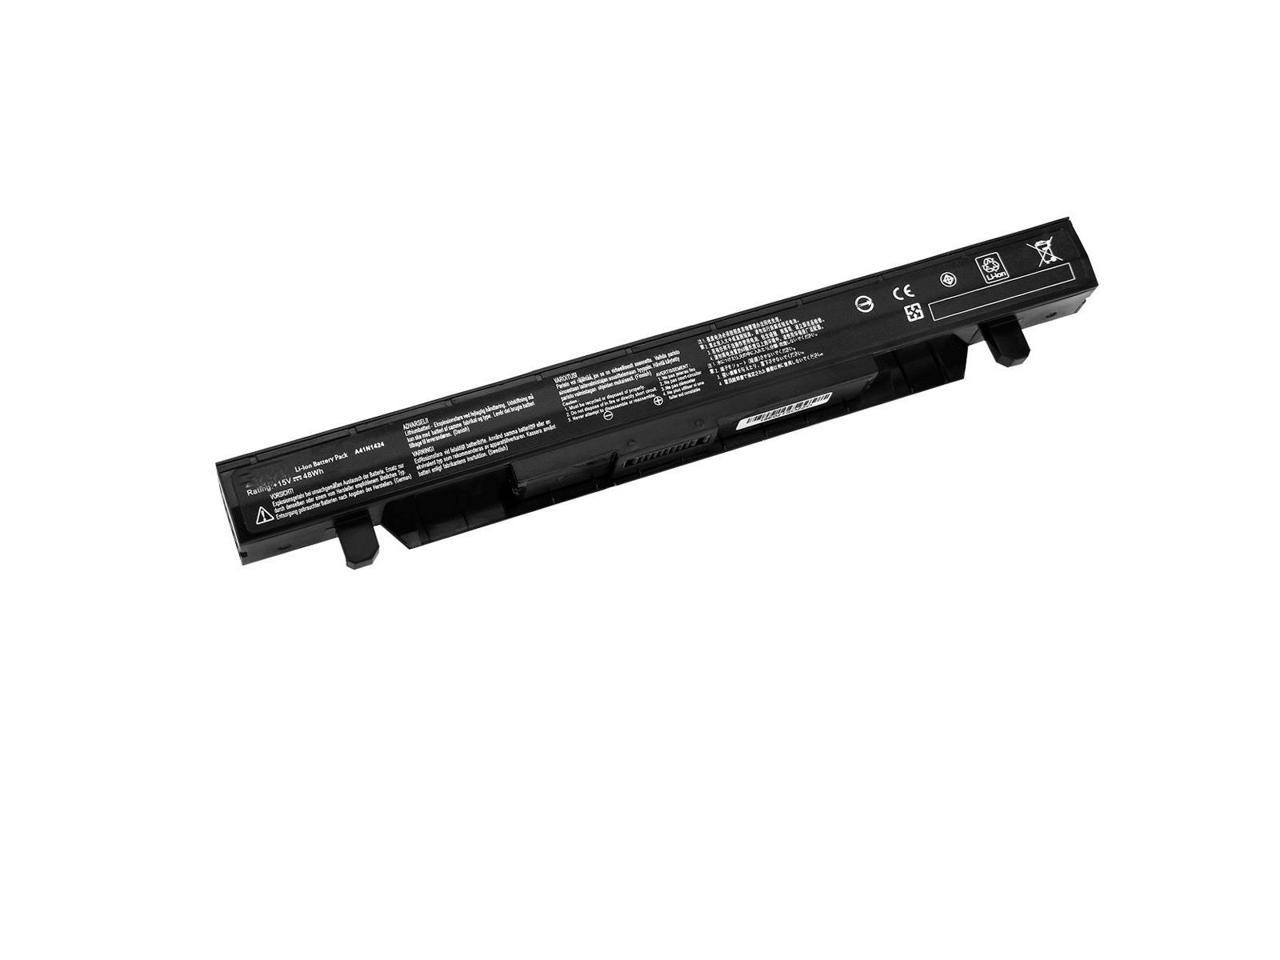 FengWings® A41N1424 Batteria 15V 48Wh 3200mAh Compatibile per ASUS GL552 GL552J GL552JX GL552V GL552VW ROG GL552 GL552J GL552JX GL552V GL552VW ZX50 ZX50J ZX50JX